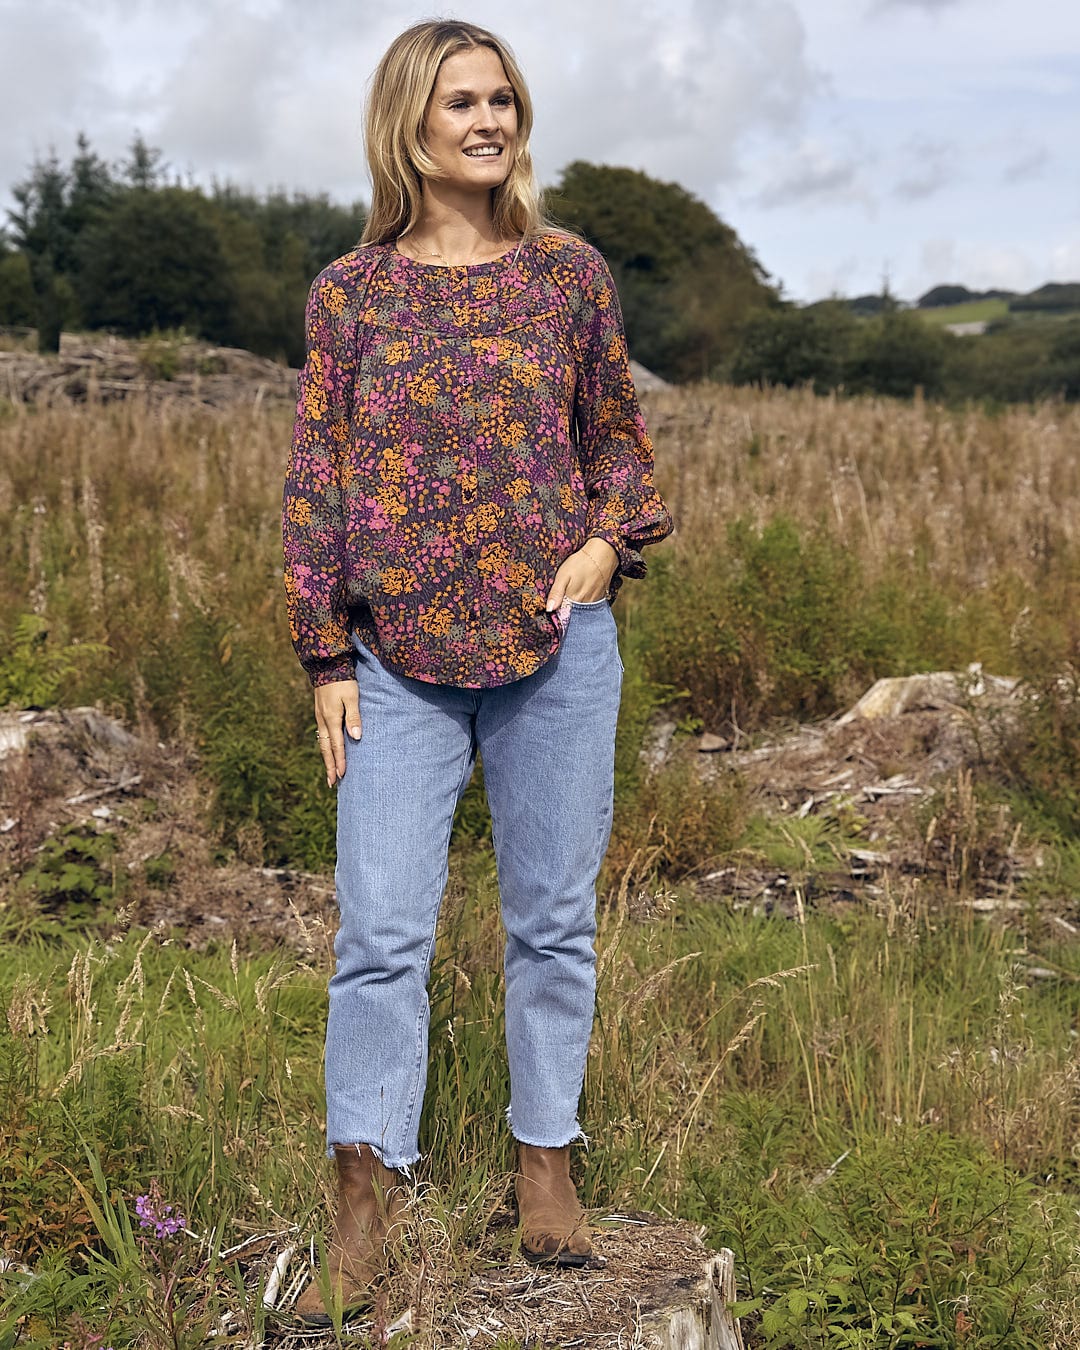 A woman standing in a field wearing Garnet - All Over Print Blouse - Orange by Saltrock jeans and a floral top.